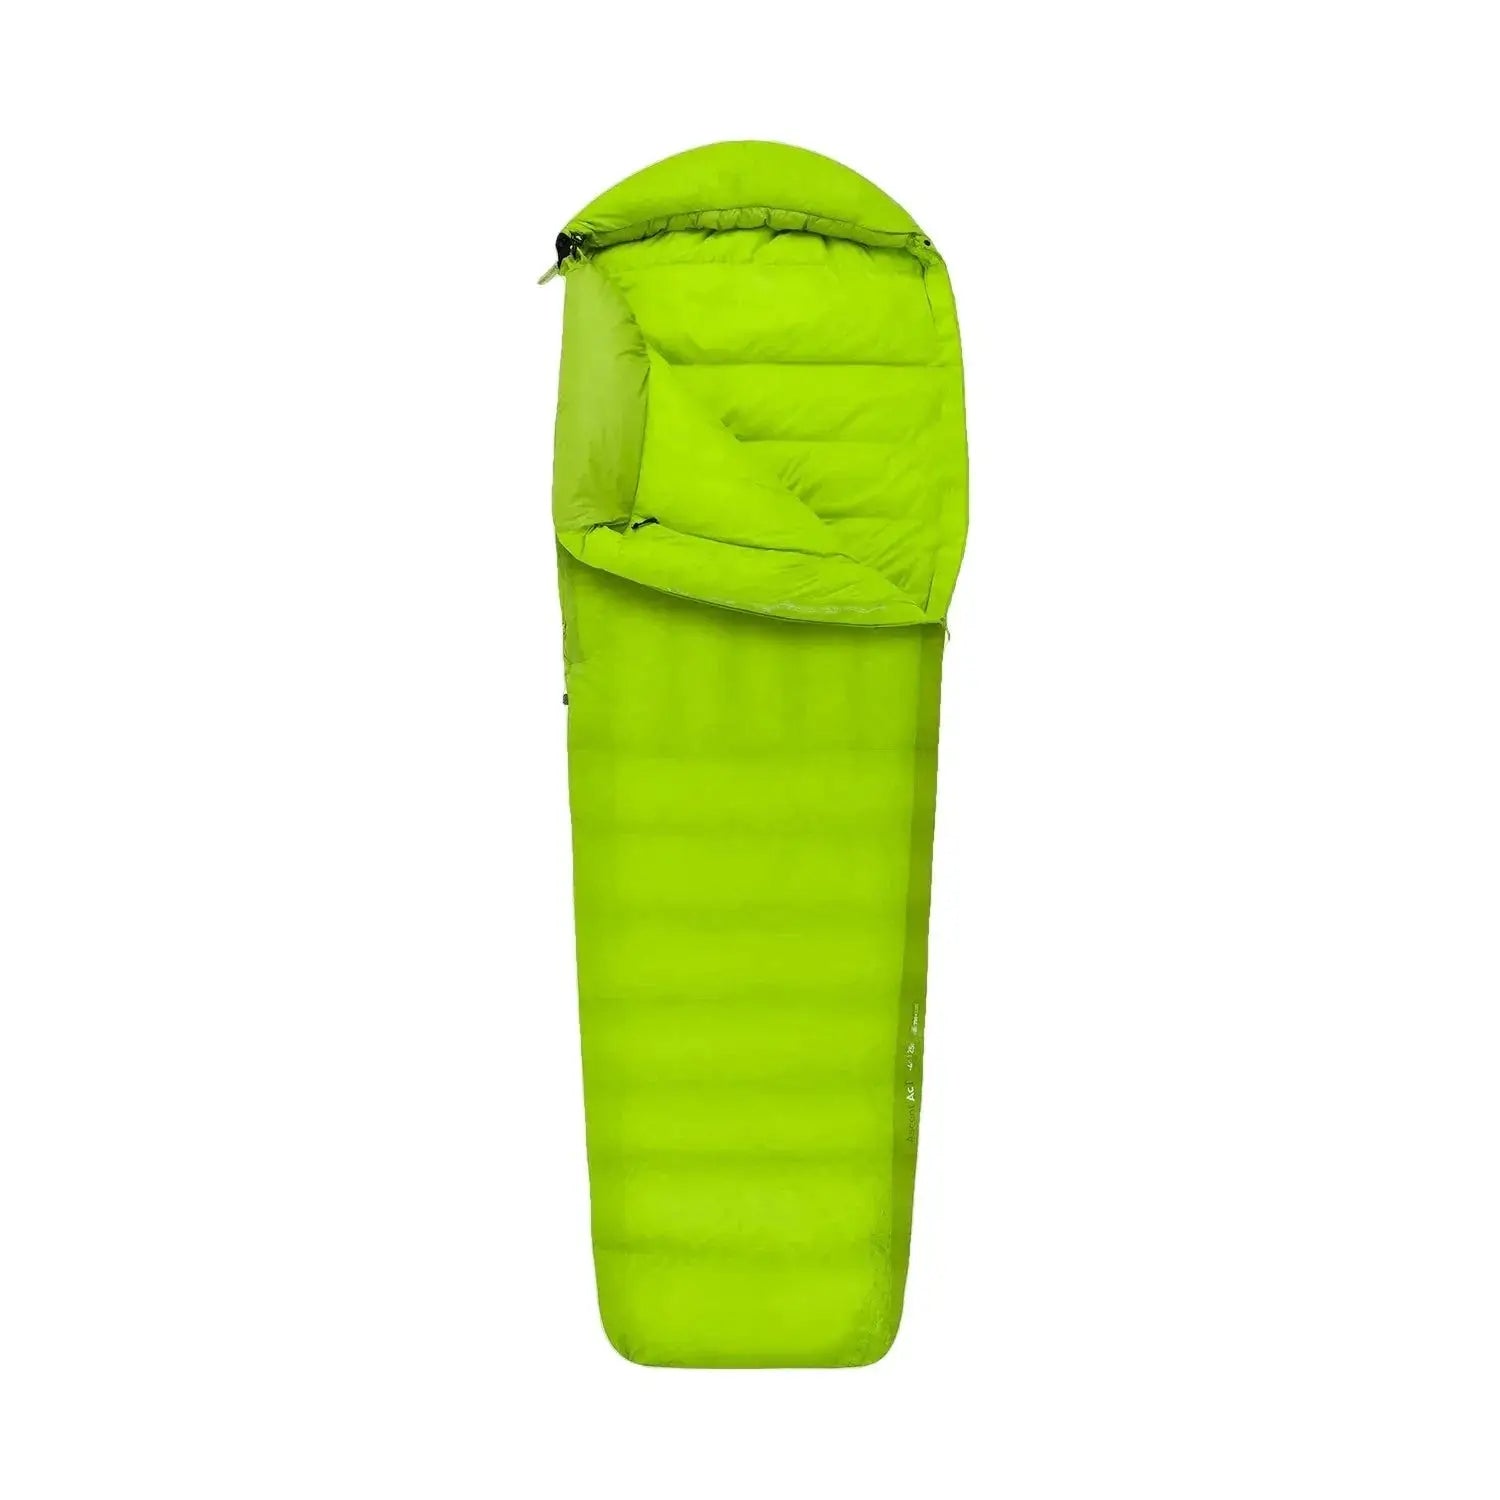 Sea to Summit Ascent Down Sleeping Bag 25°F, Regular, top view